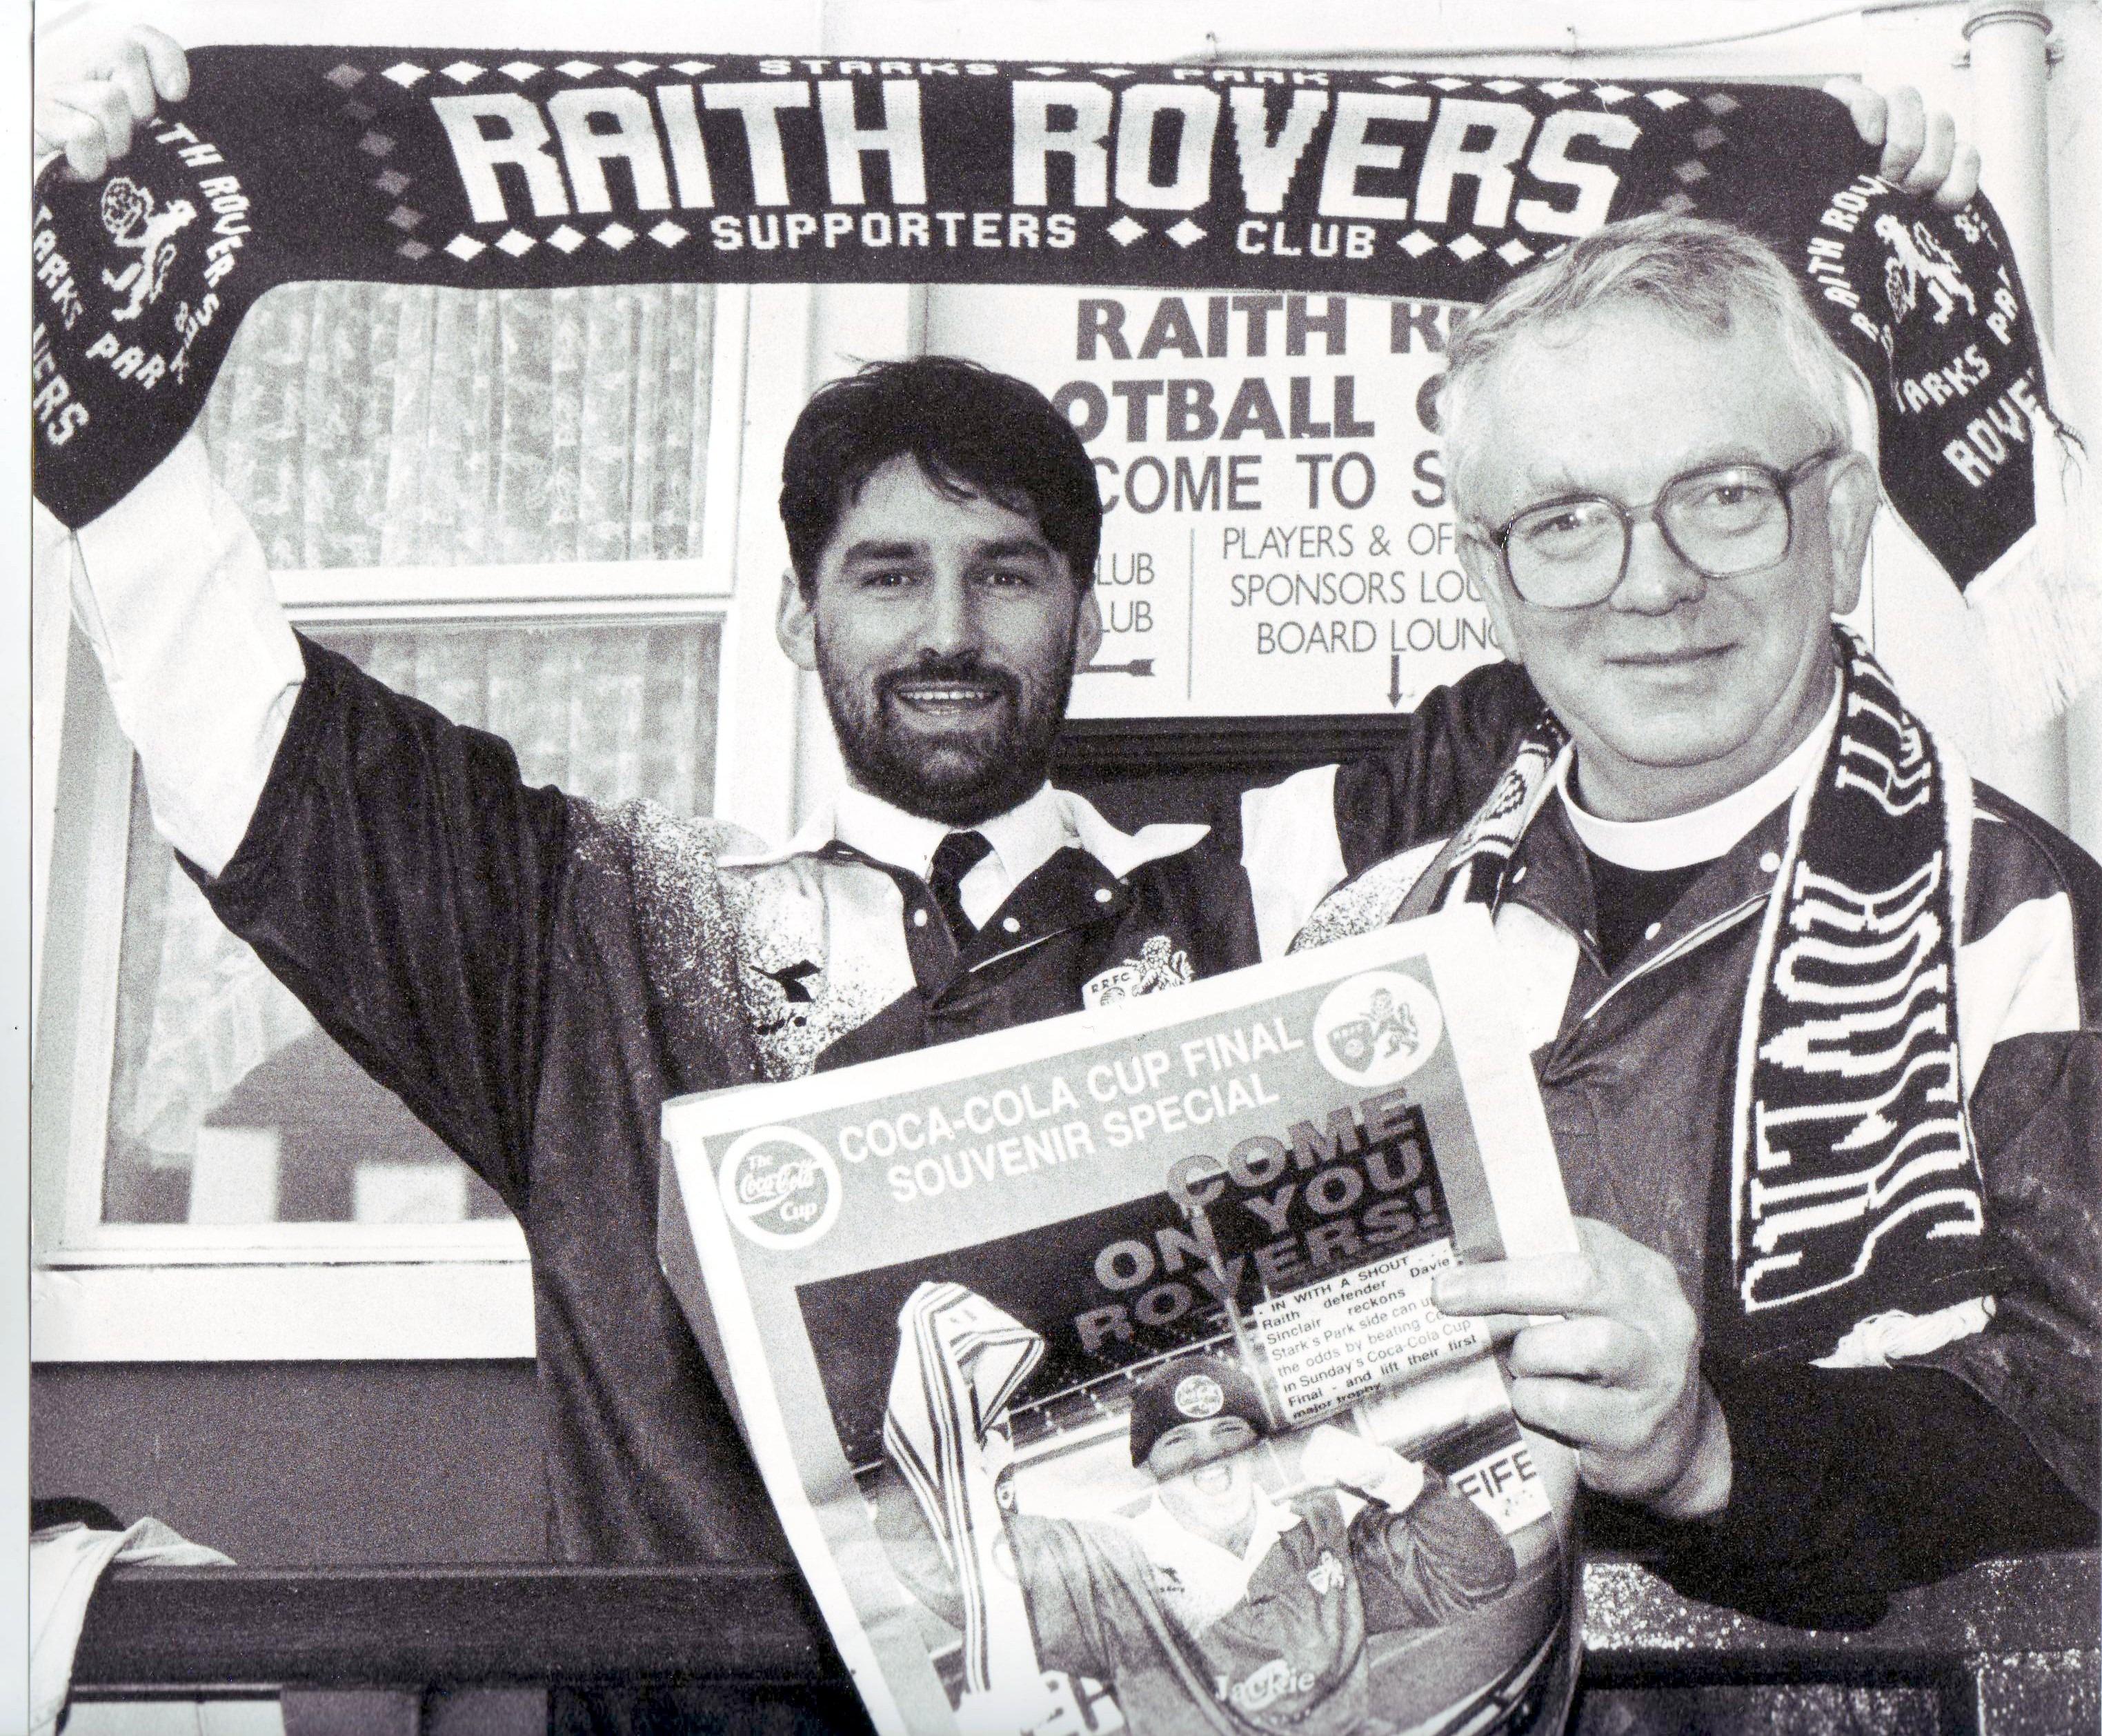 Kirkcaldy ministers Rev Peter MacDonald, Torbain Parish Church (left) and Brian Tomlinson, Abbosthall Church offer divine support for Raith Rovers at the 1994 Coca Cola Cup final versus Celtic